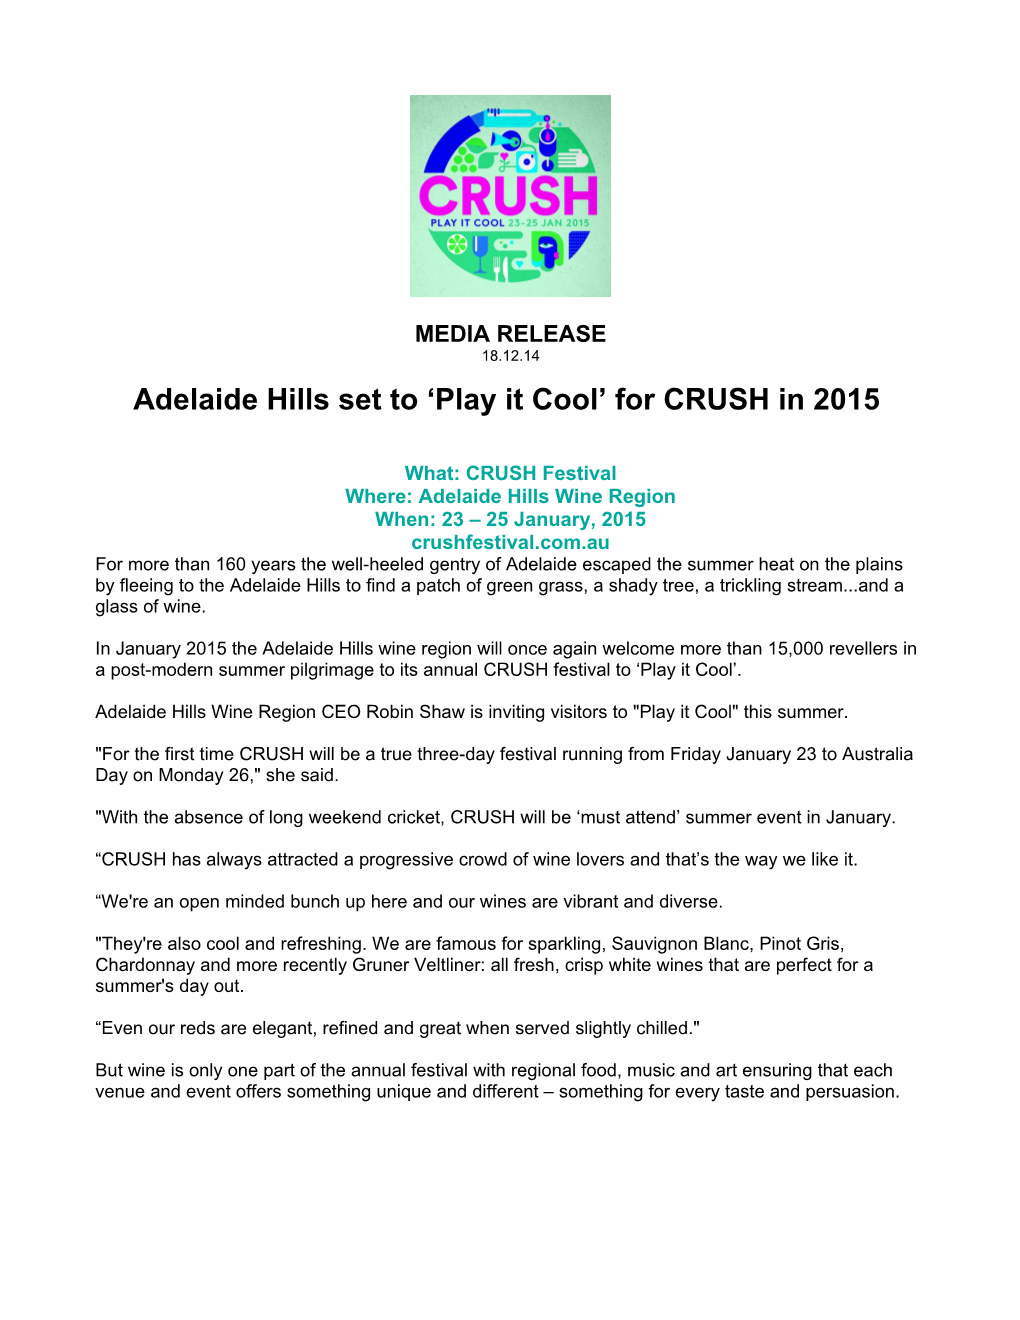 Adelaide Hills Set to Play It Cool for CRUSH in 2015